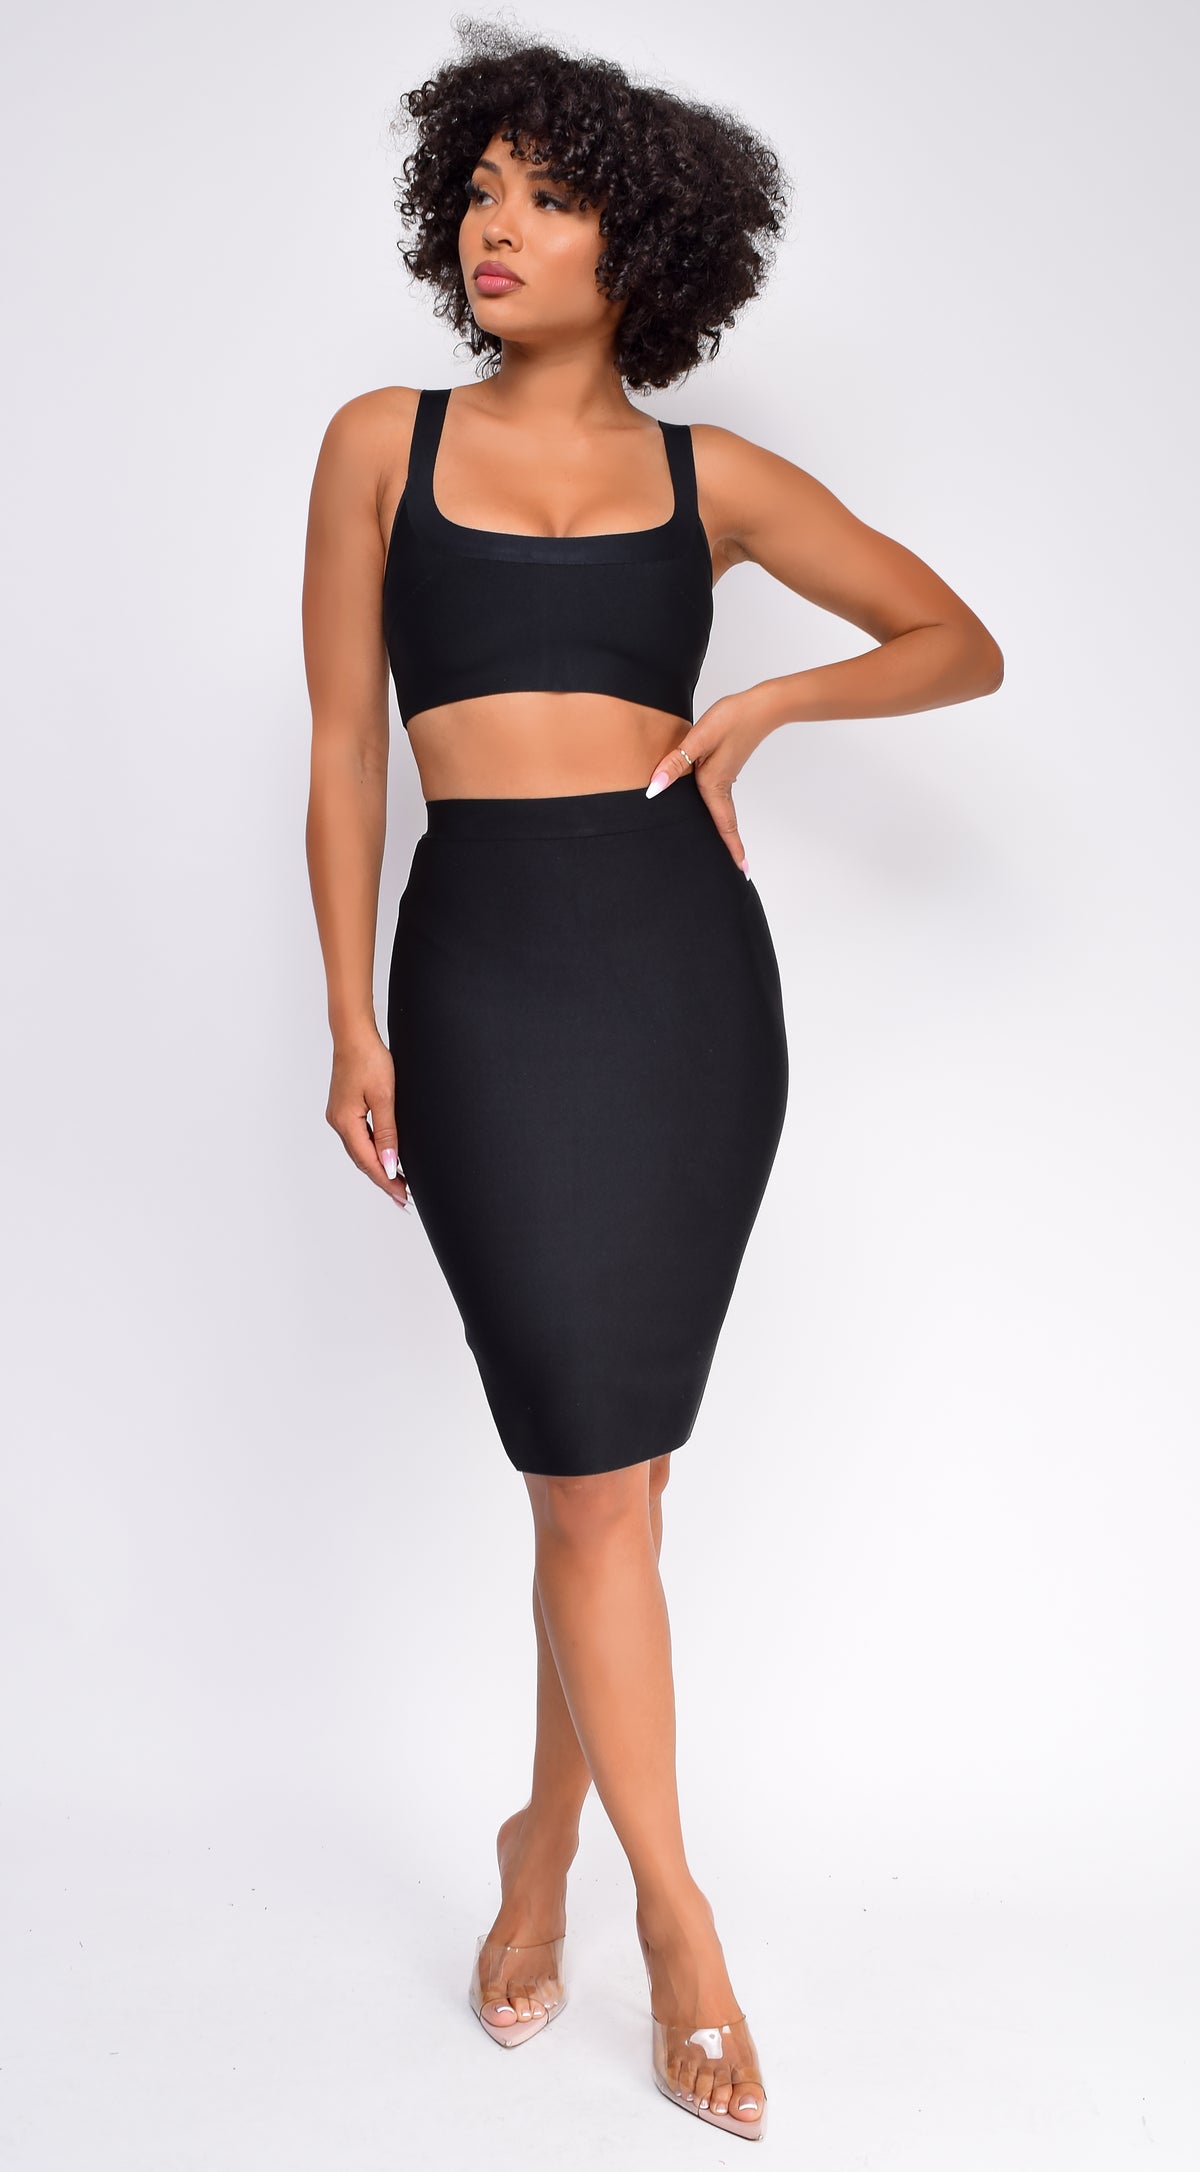 Milly Black Bandage Top And Skirt Set